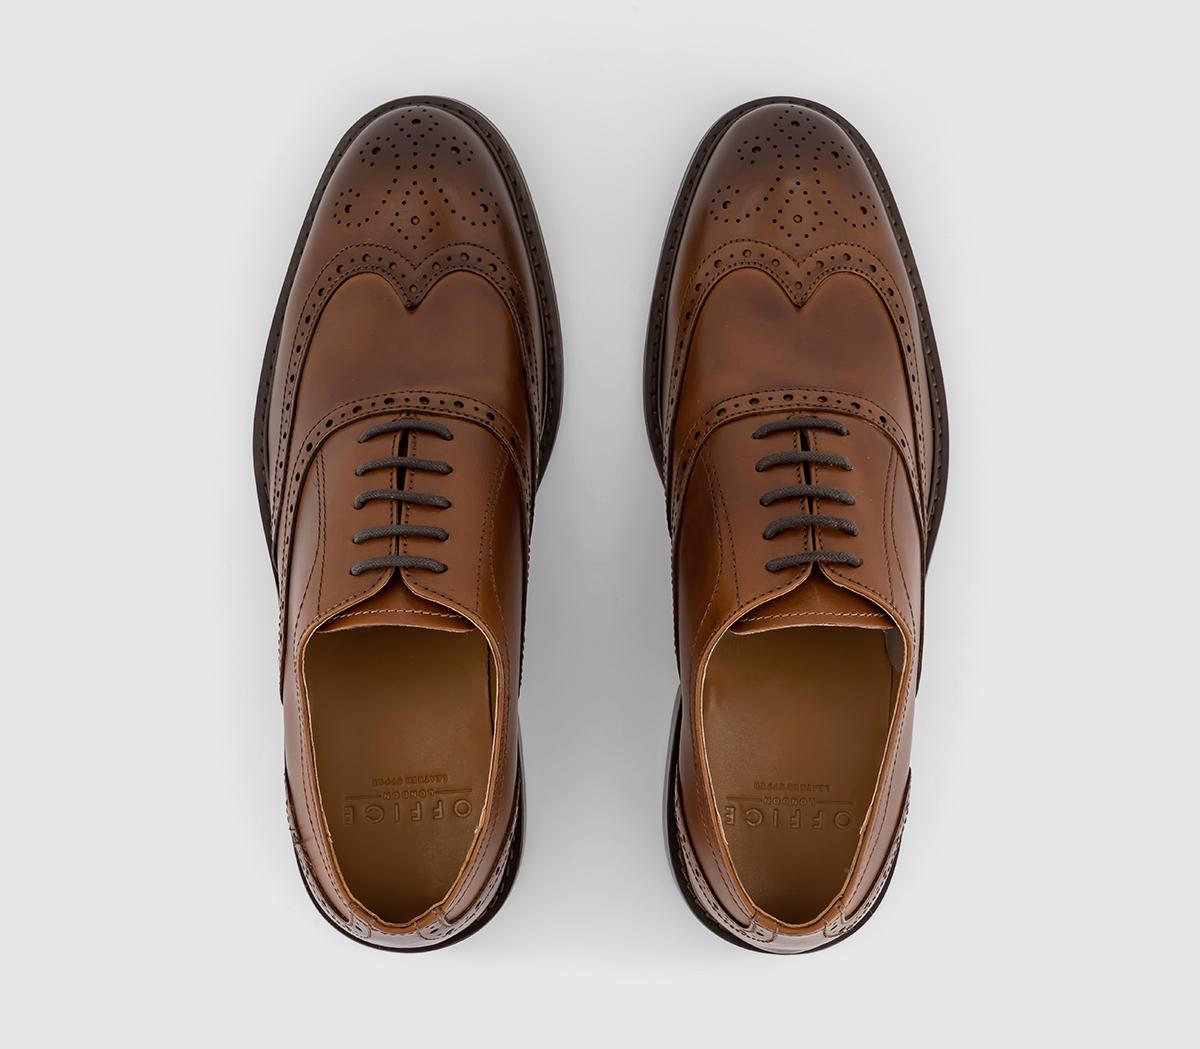 OFFICE Maxwell Oxford Brogues Tan Leather - Mens Brogues